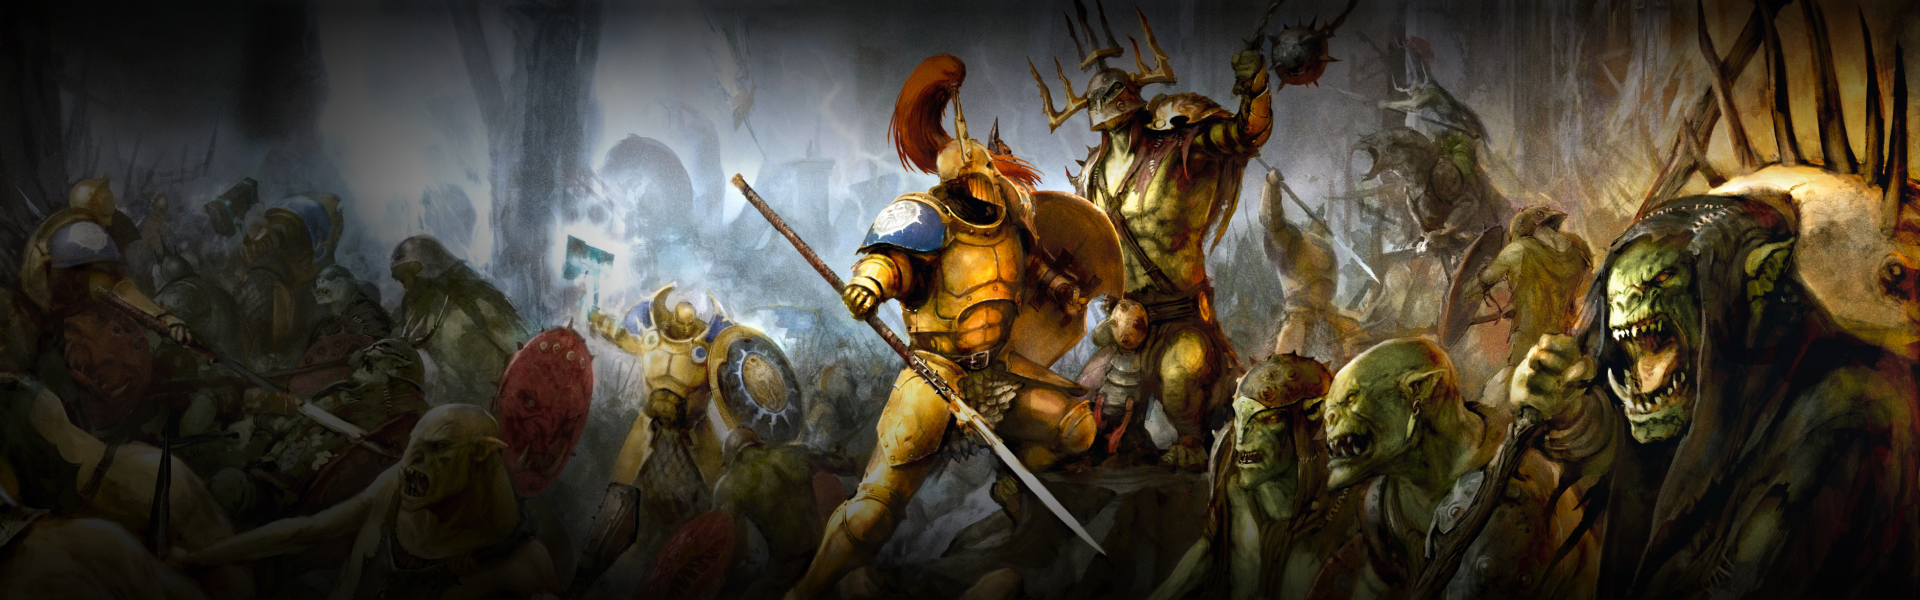 Save 20% on this saturdays Age of Sigmar pre-orders